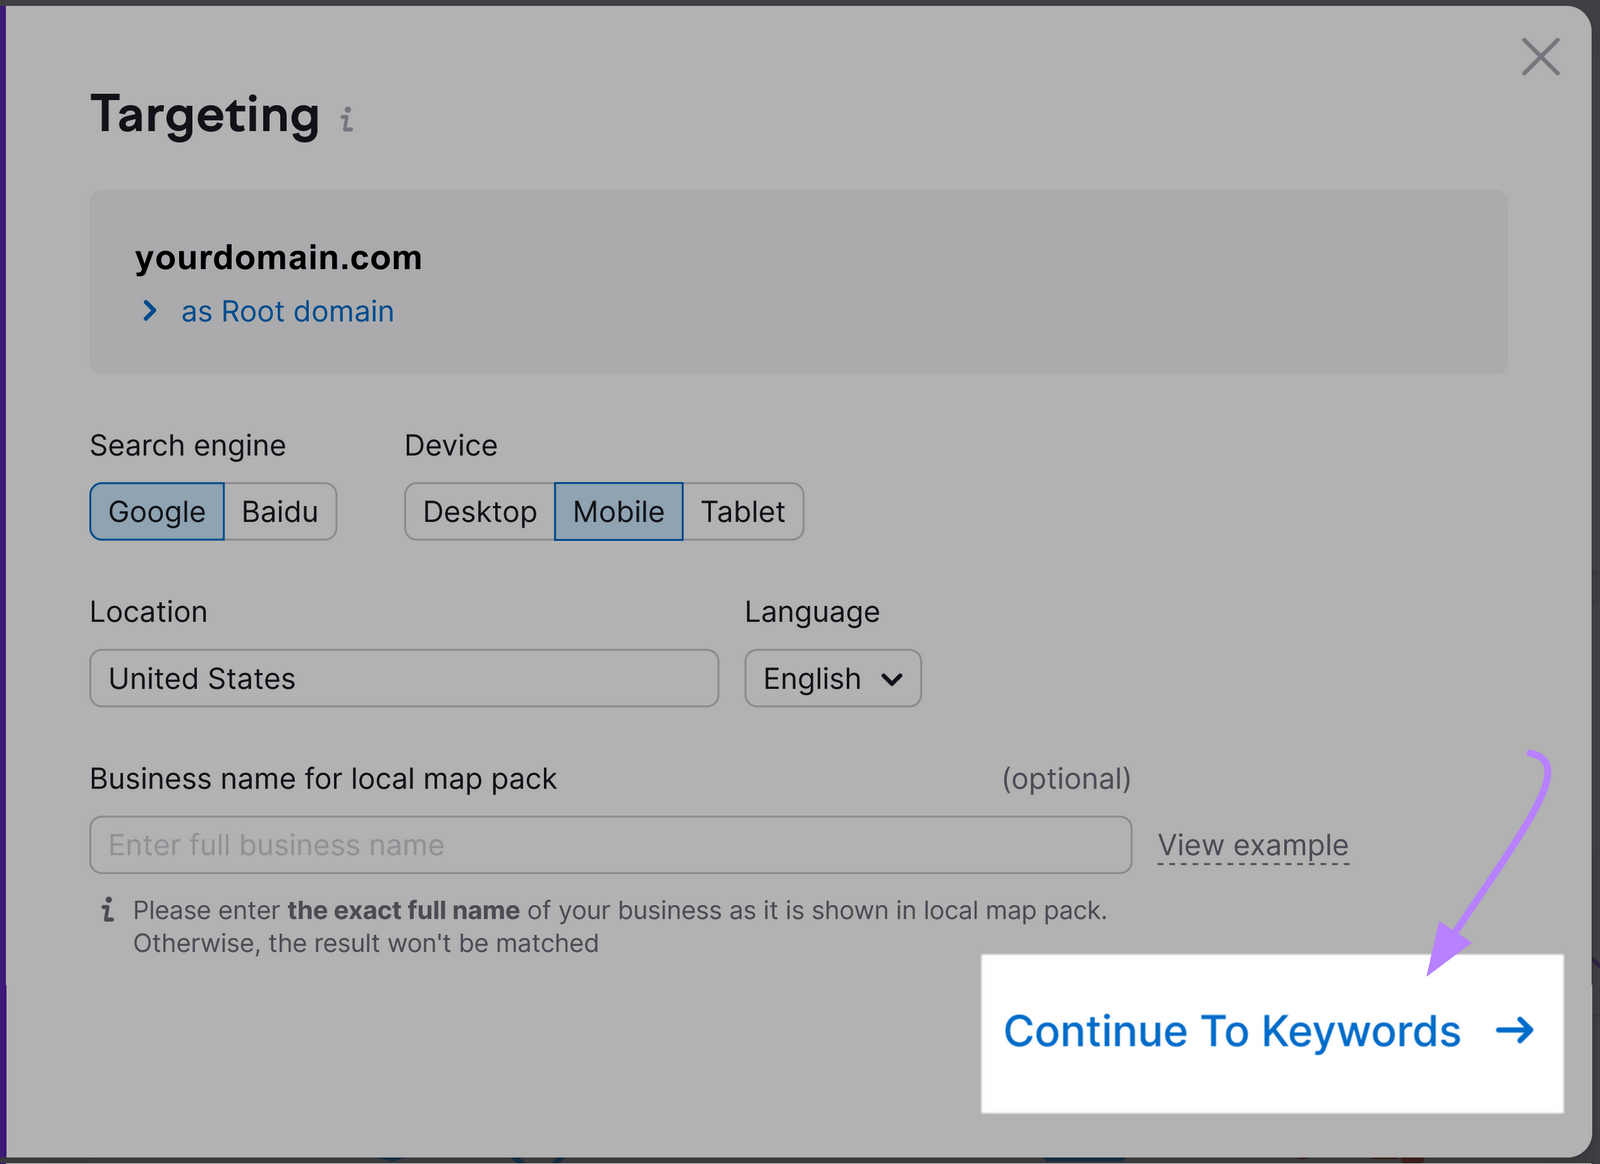 “Continue To Keywords" button highlighted in the bottom right corner